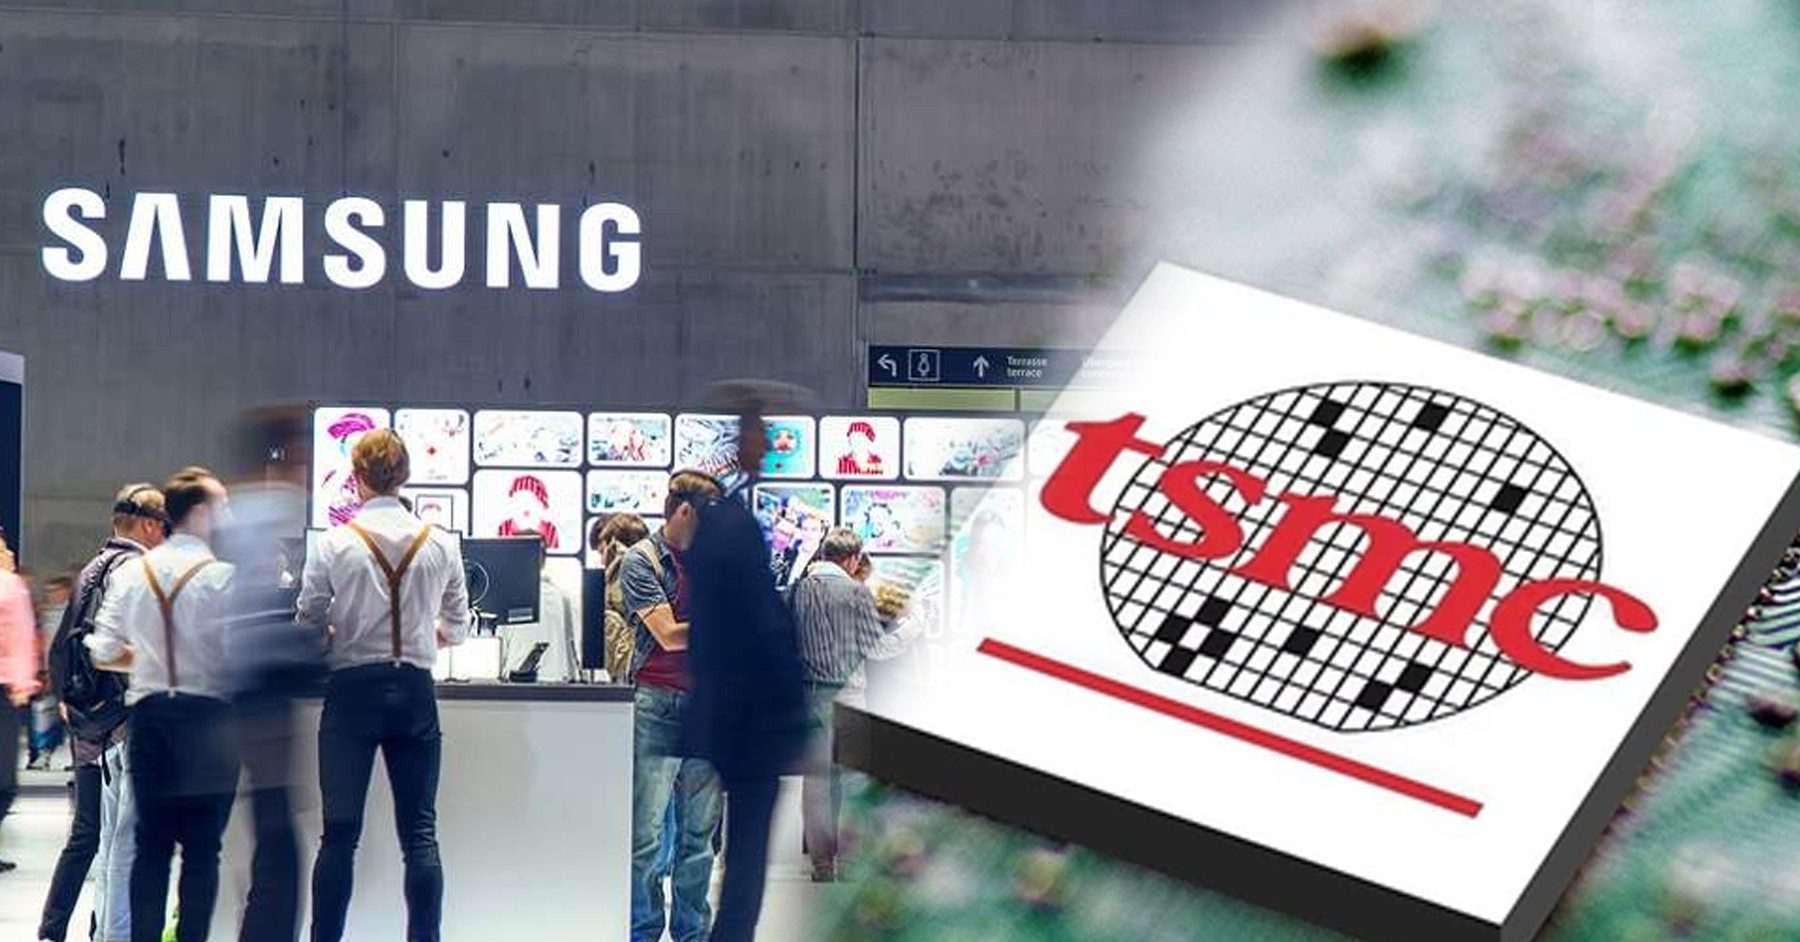 The world chip industry was shaken by an earthquake, Samsung reclaimed the throne from Apple